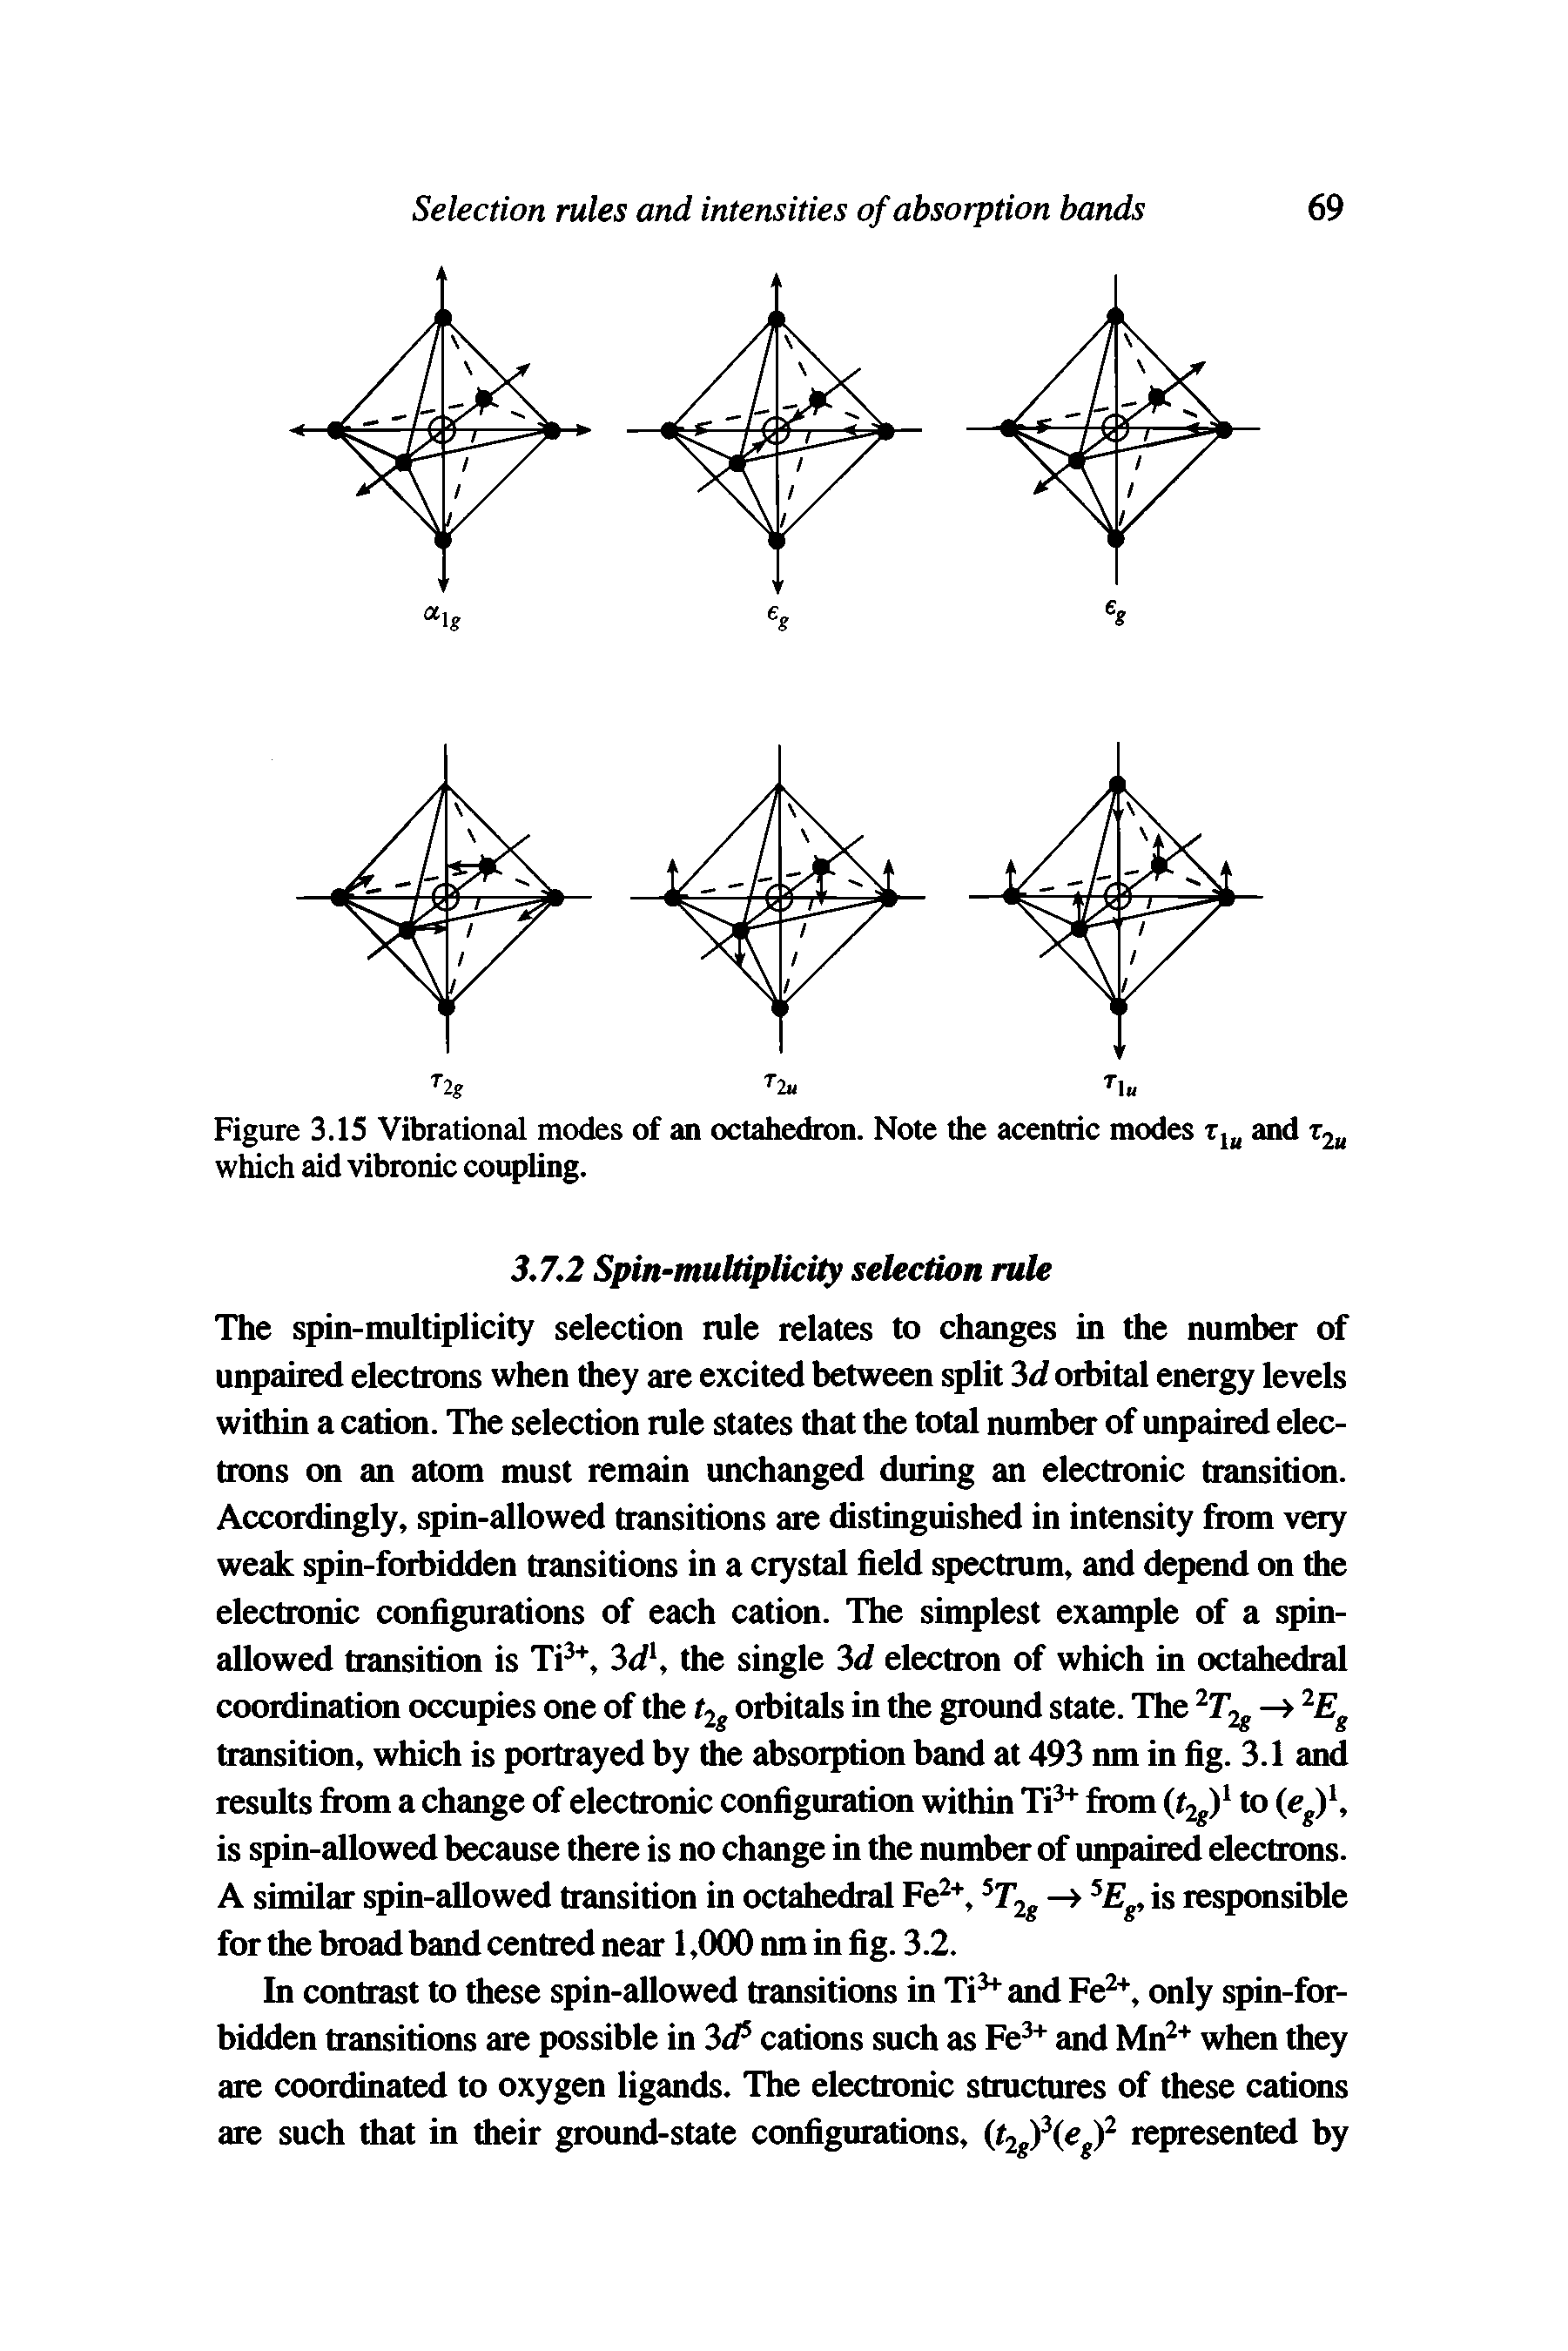 Figure 3.15 Vibrational modes of an octahedron. Note the acentric modes t1b and x2u which aid vibronic coupling.